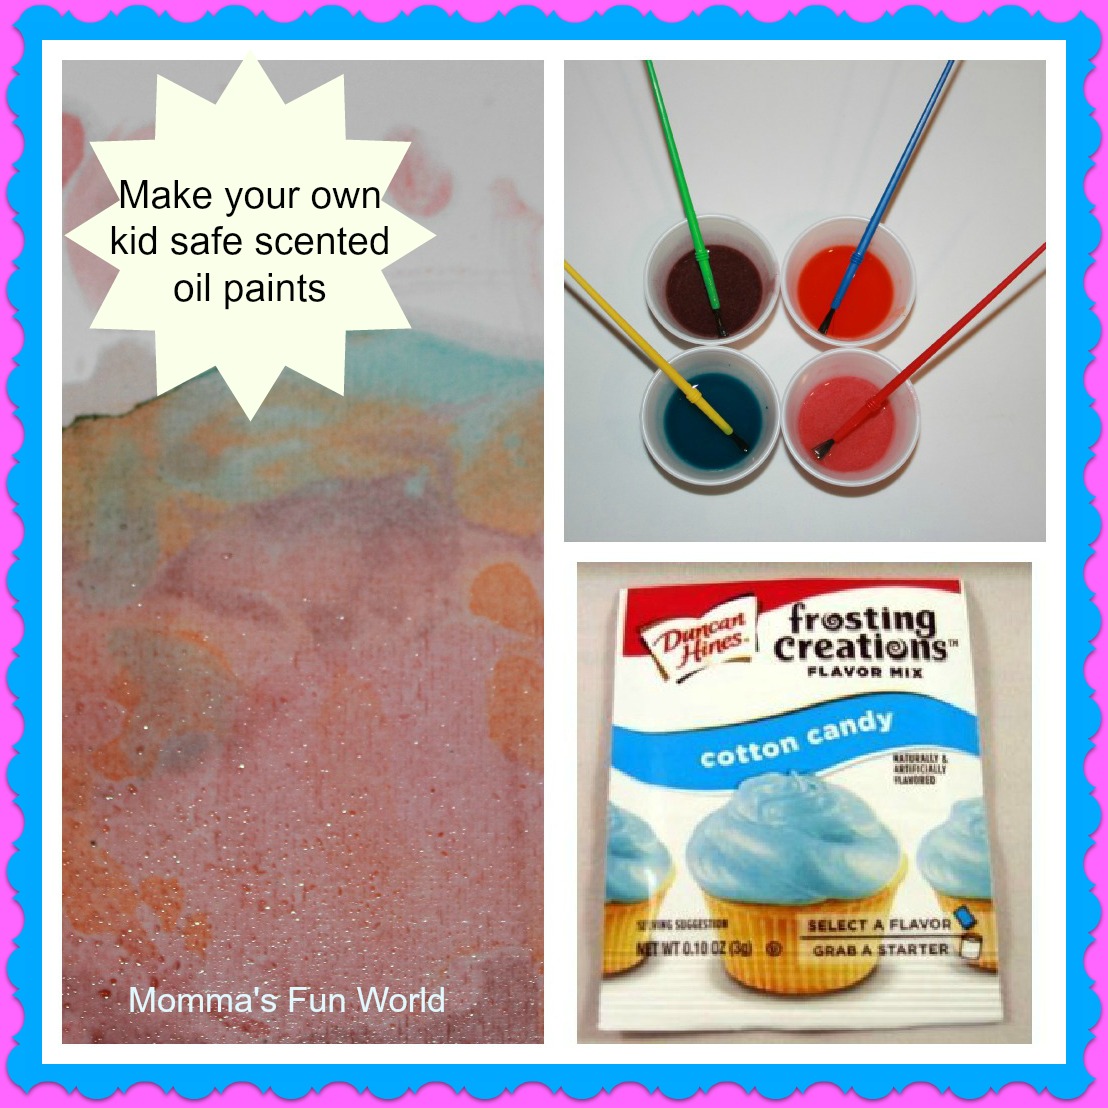 Momma's Fun World: Make your own kid safe scented oil paint